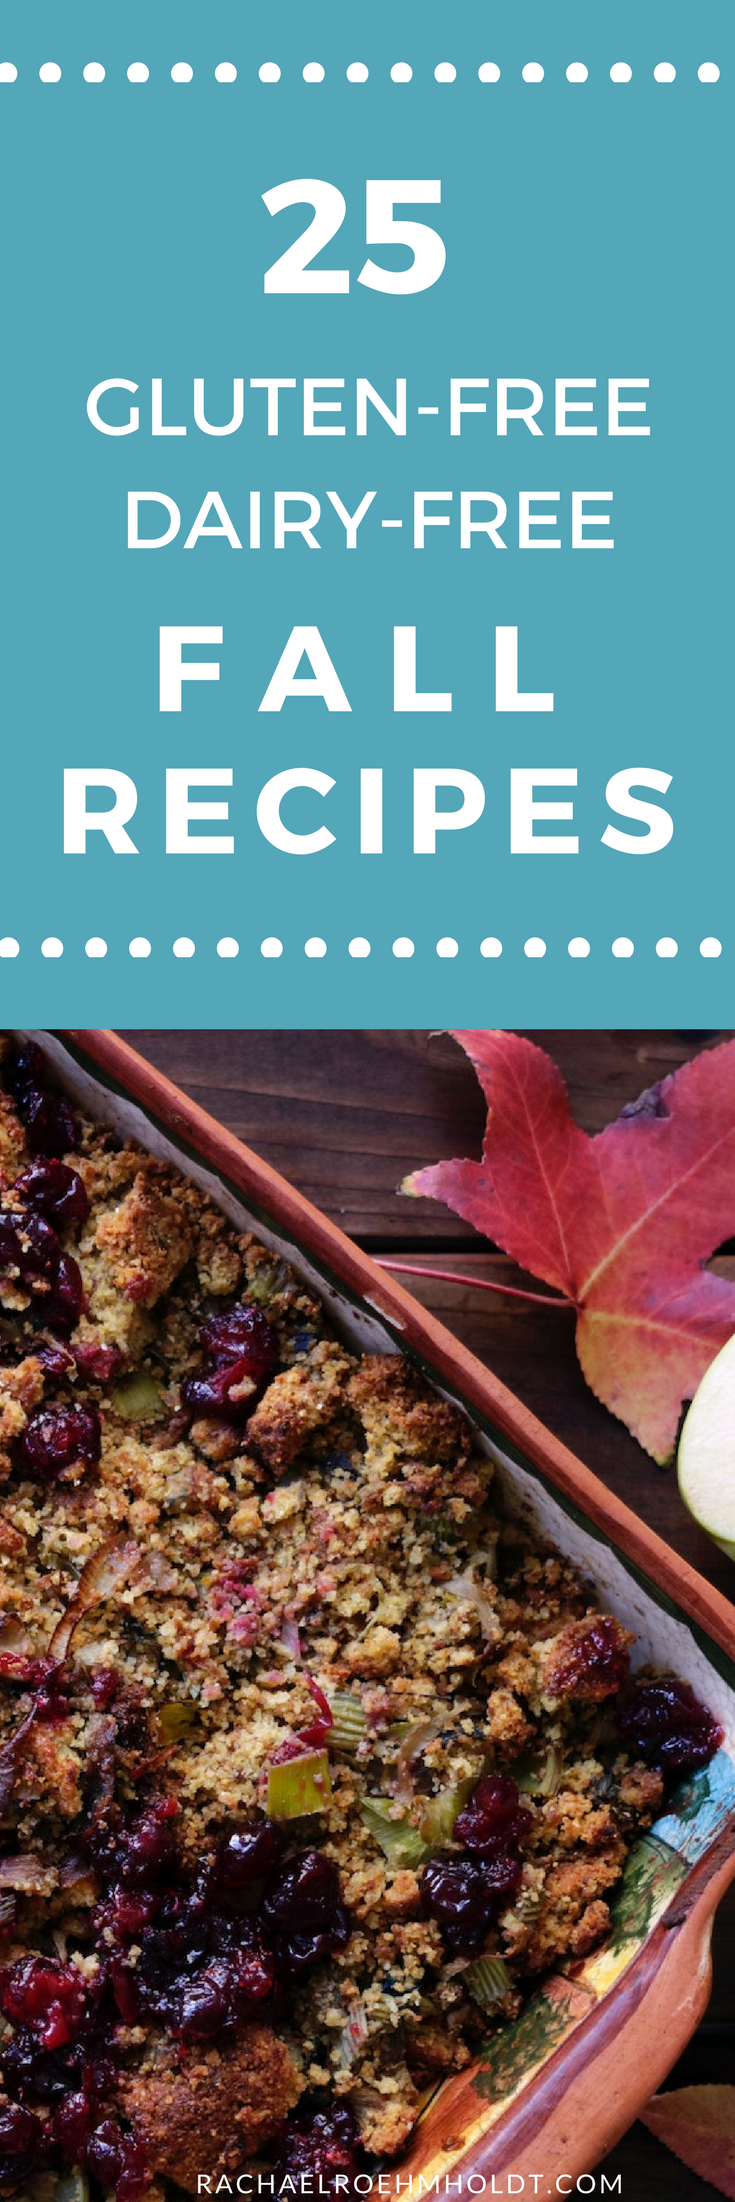 Looking for some fall recipes for your gluten-free dairy-free diet? Check out these 25 awesome recipes by clicking through to read the full post.